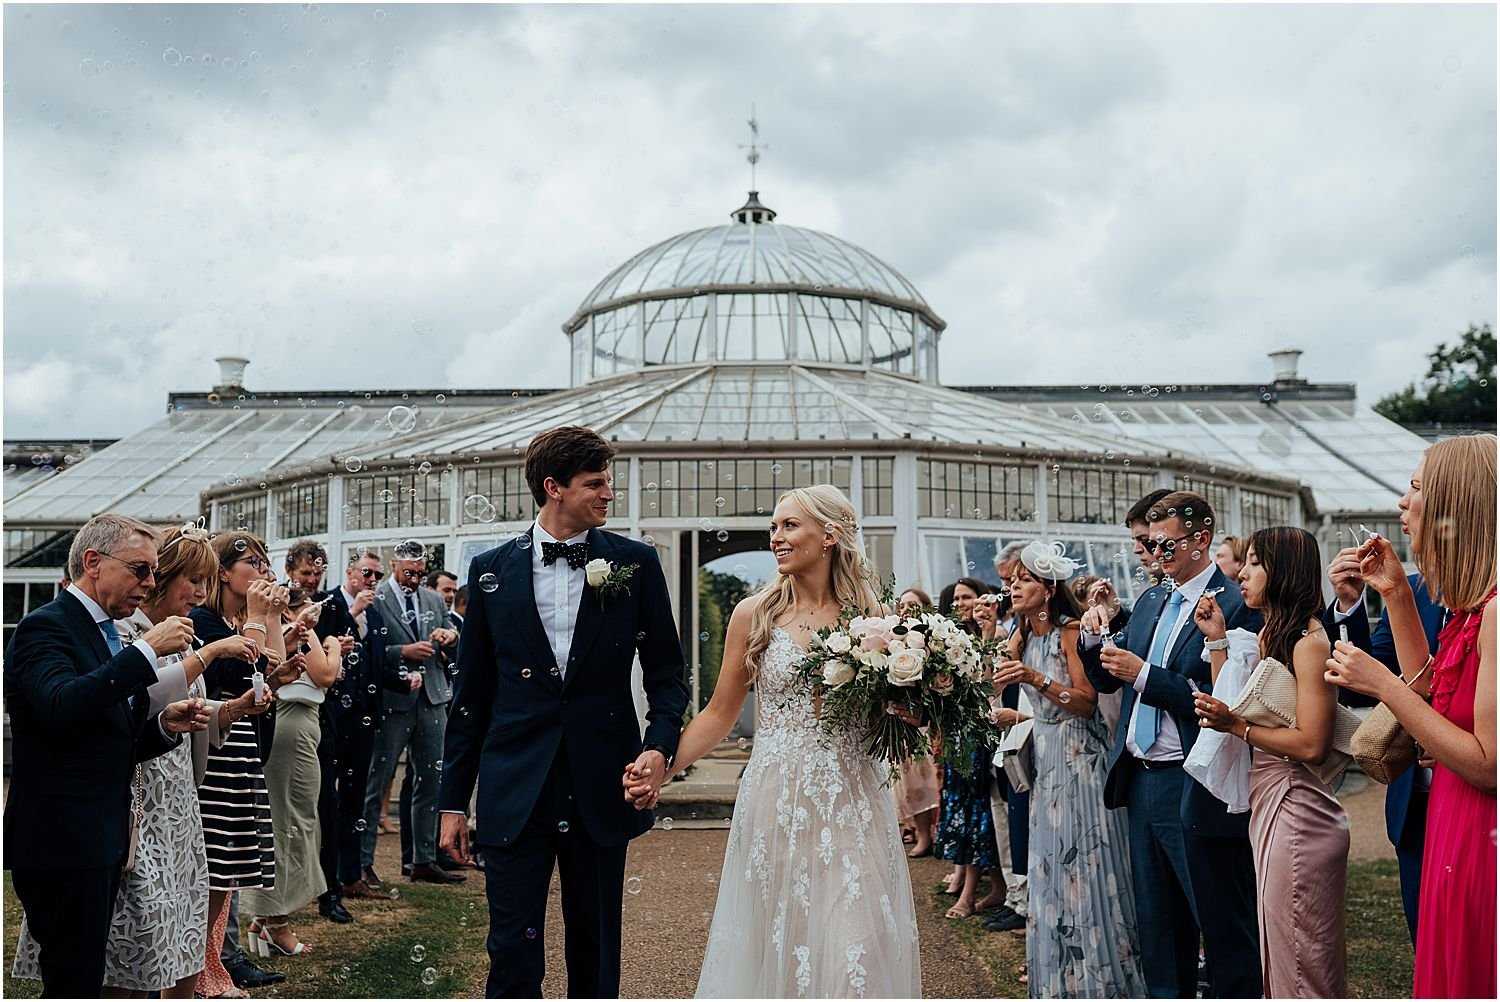 Chiswick House and Gardens conservatory wedding bubbles send off